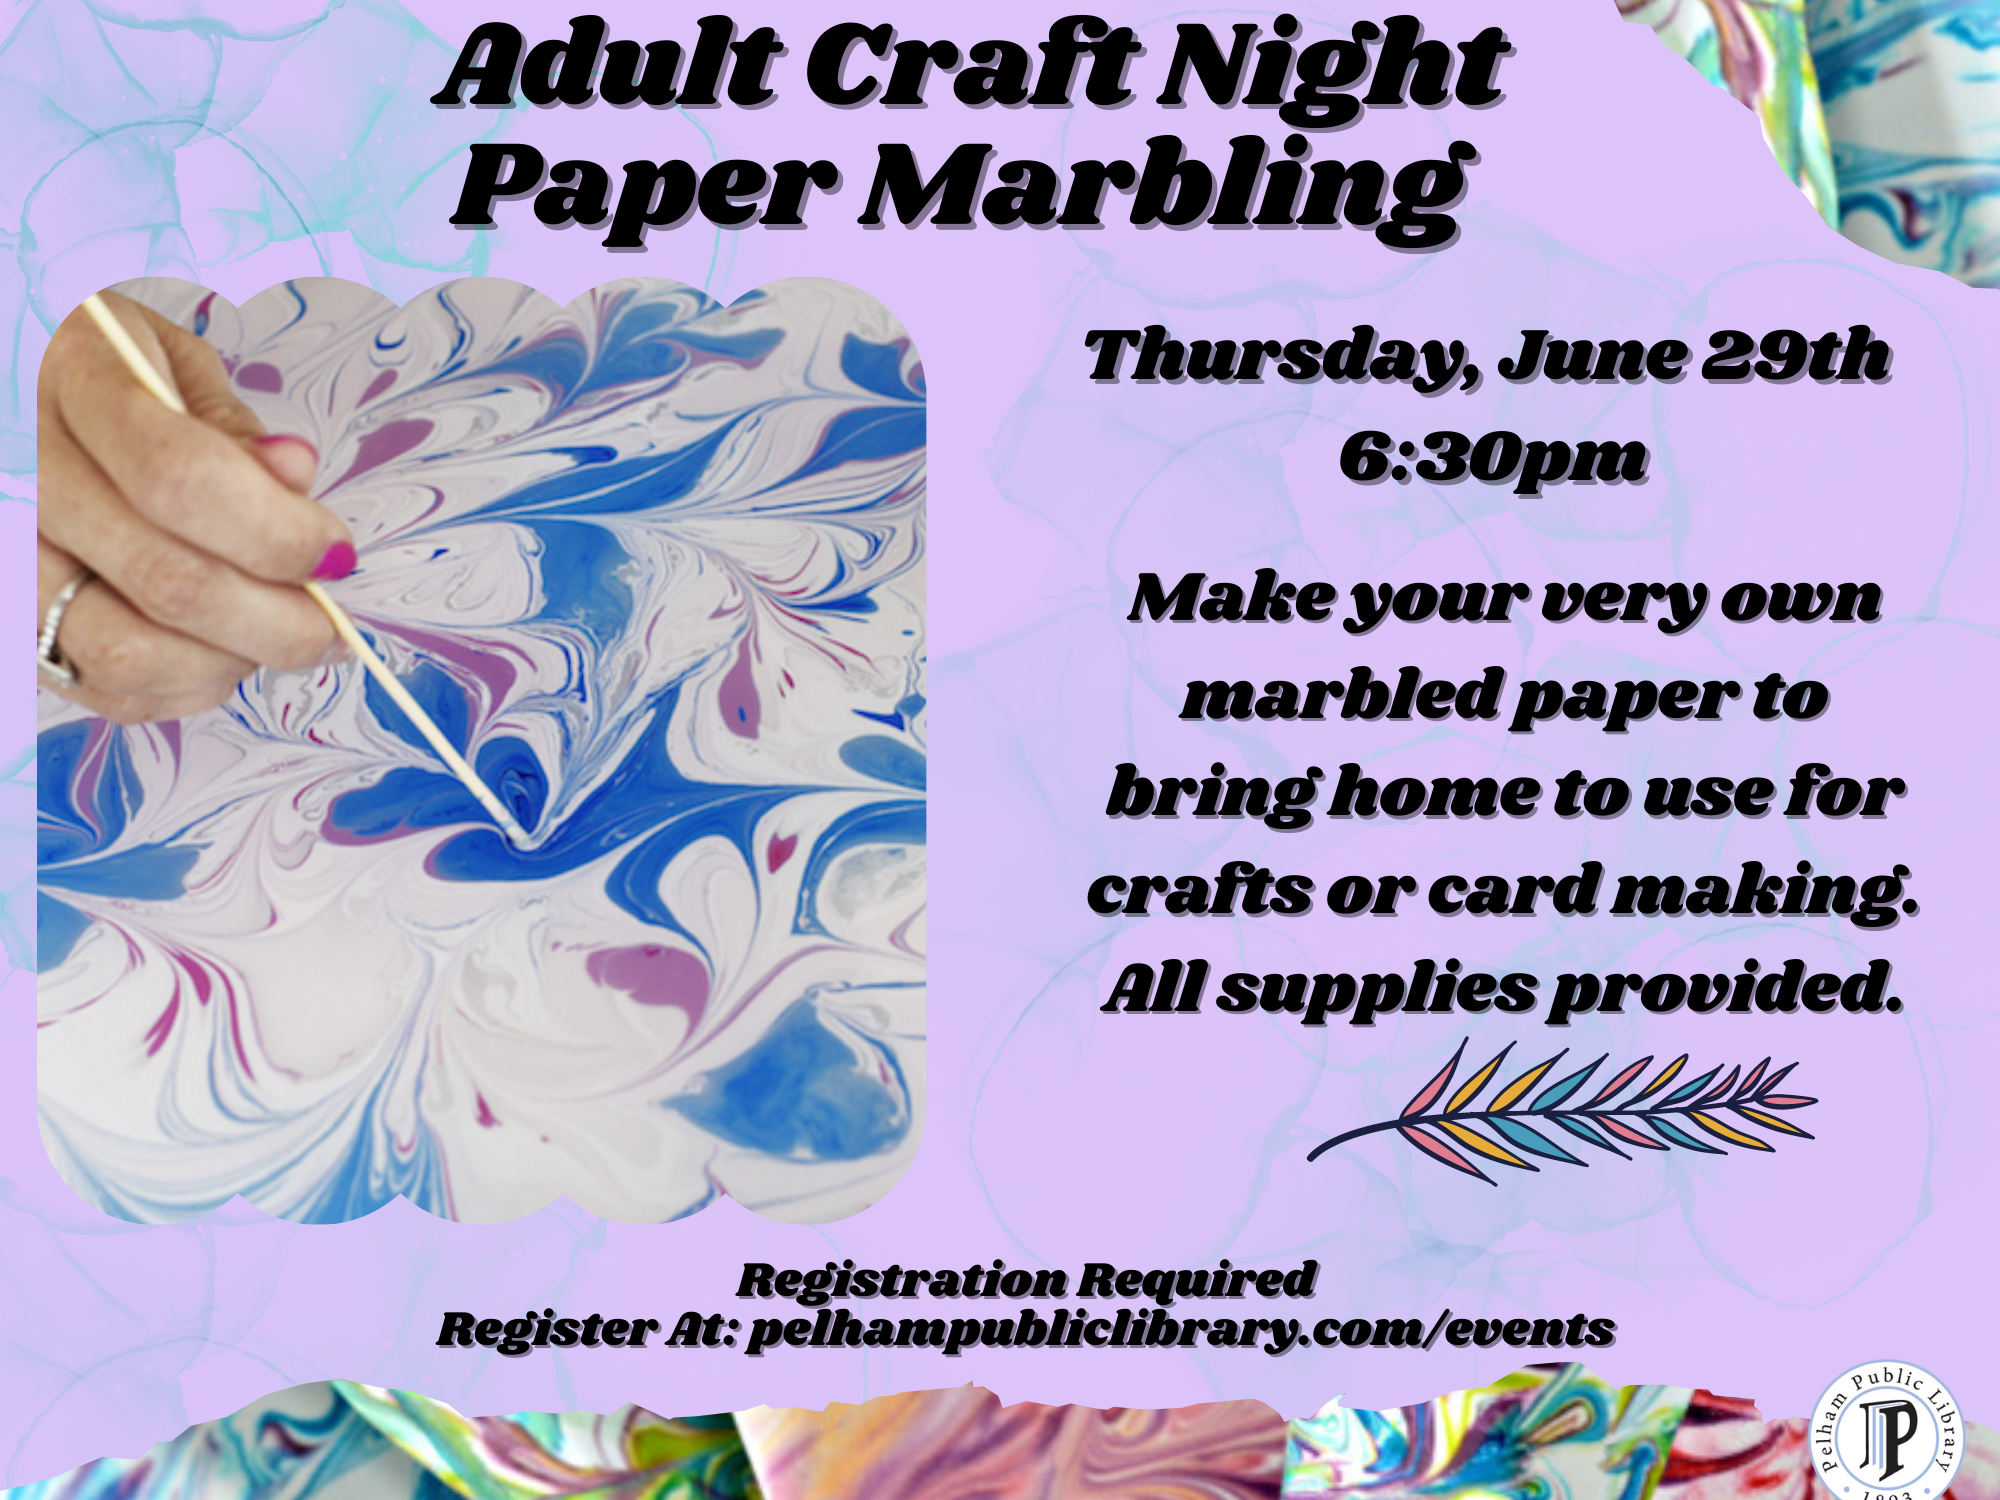 Adult Paper Marbling, Thursday June 29th, 6:30pm